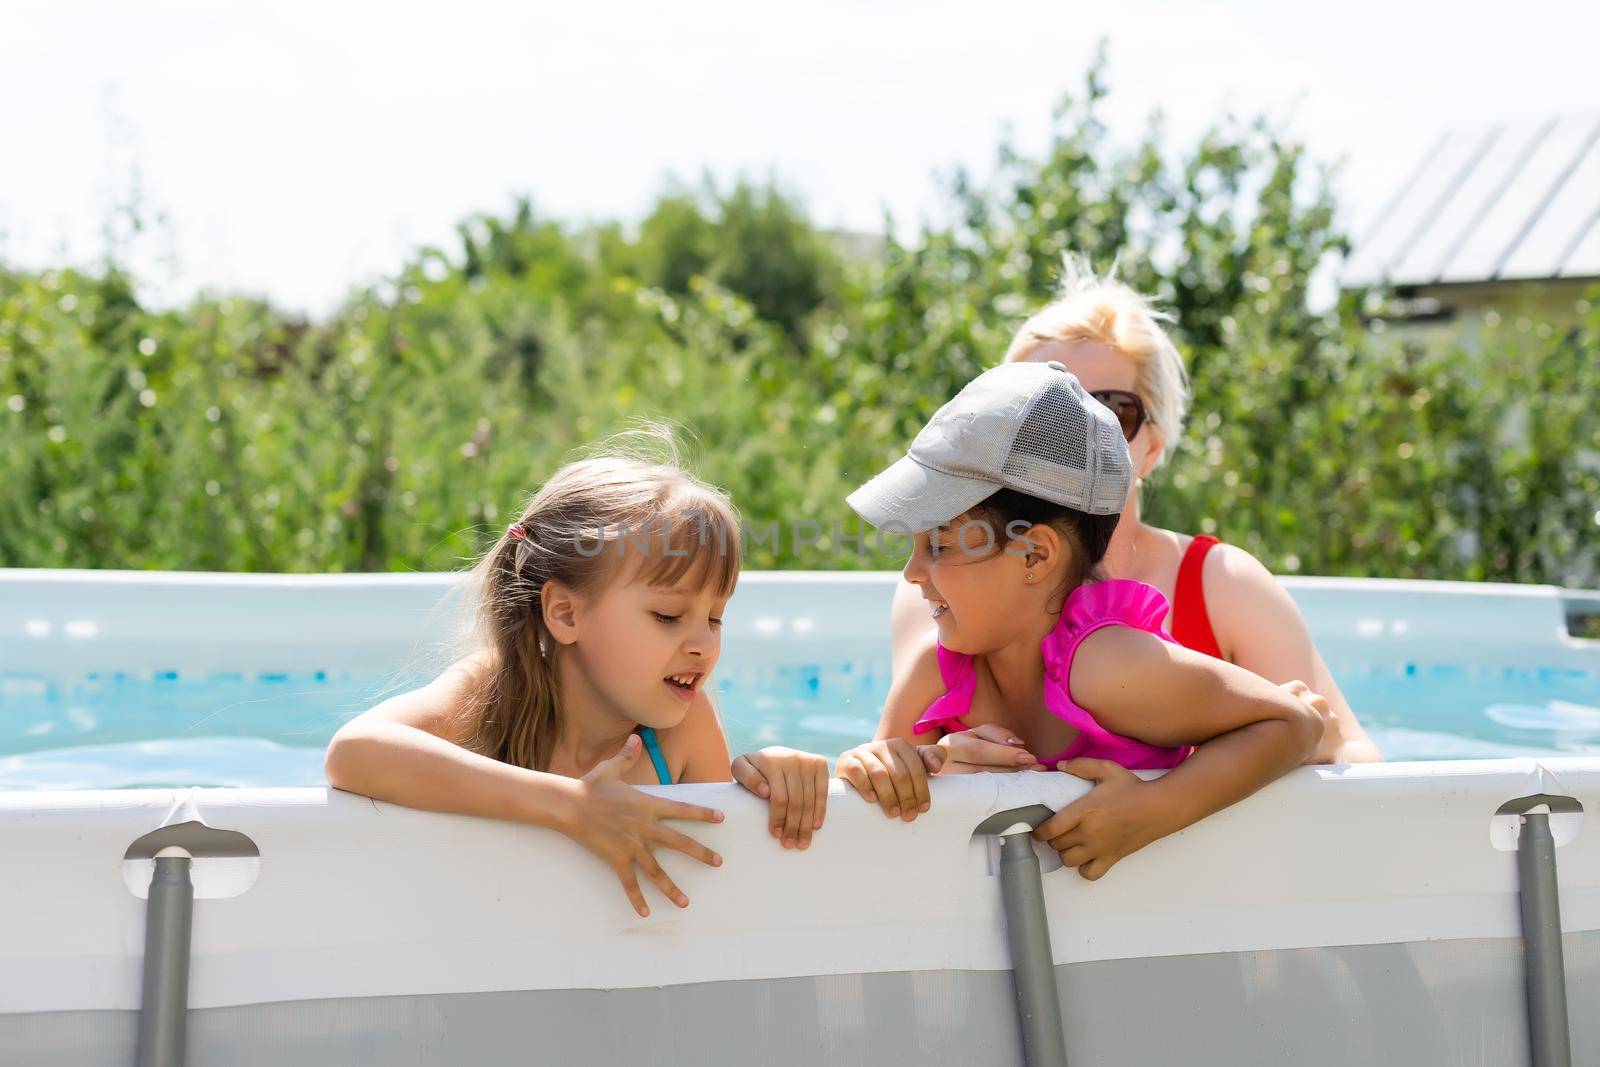 Mother and two daughters playing in pool water.Woman and two girls have fun in home pool splashing water and smiling by Andelov13